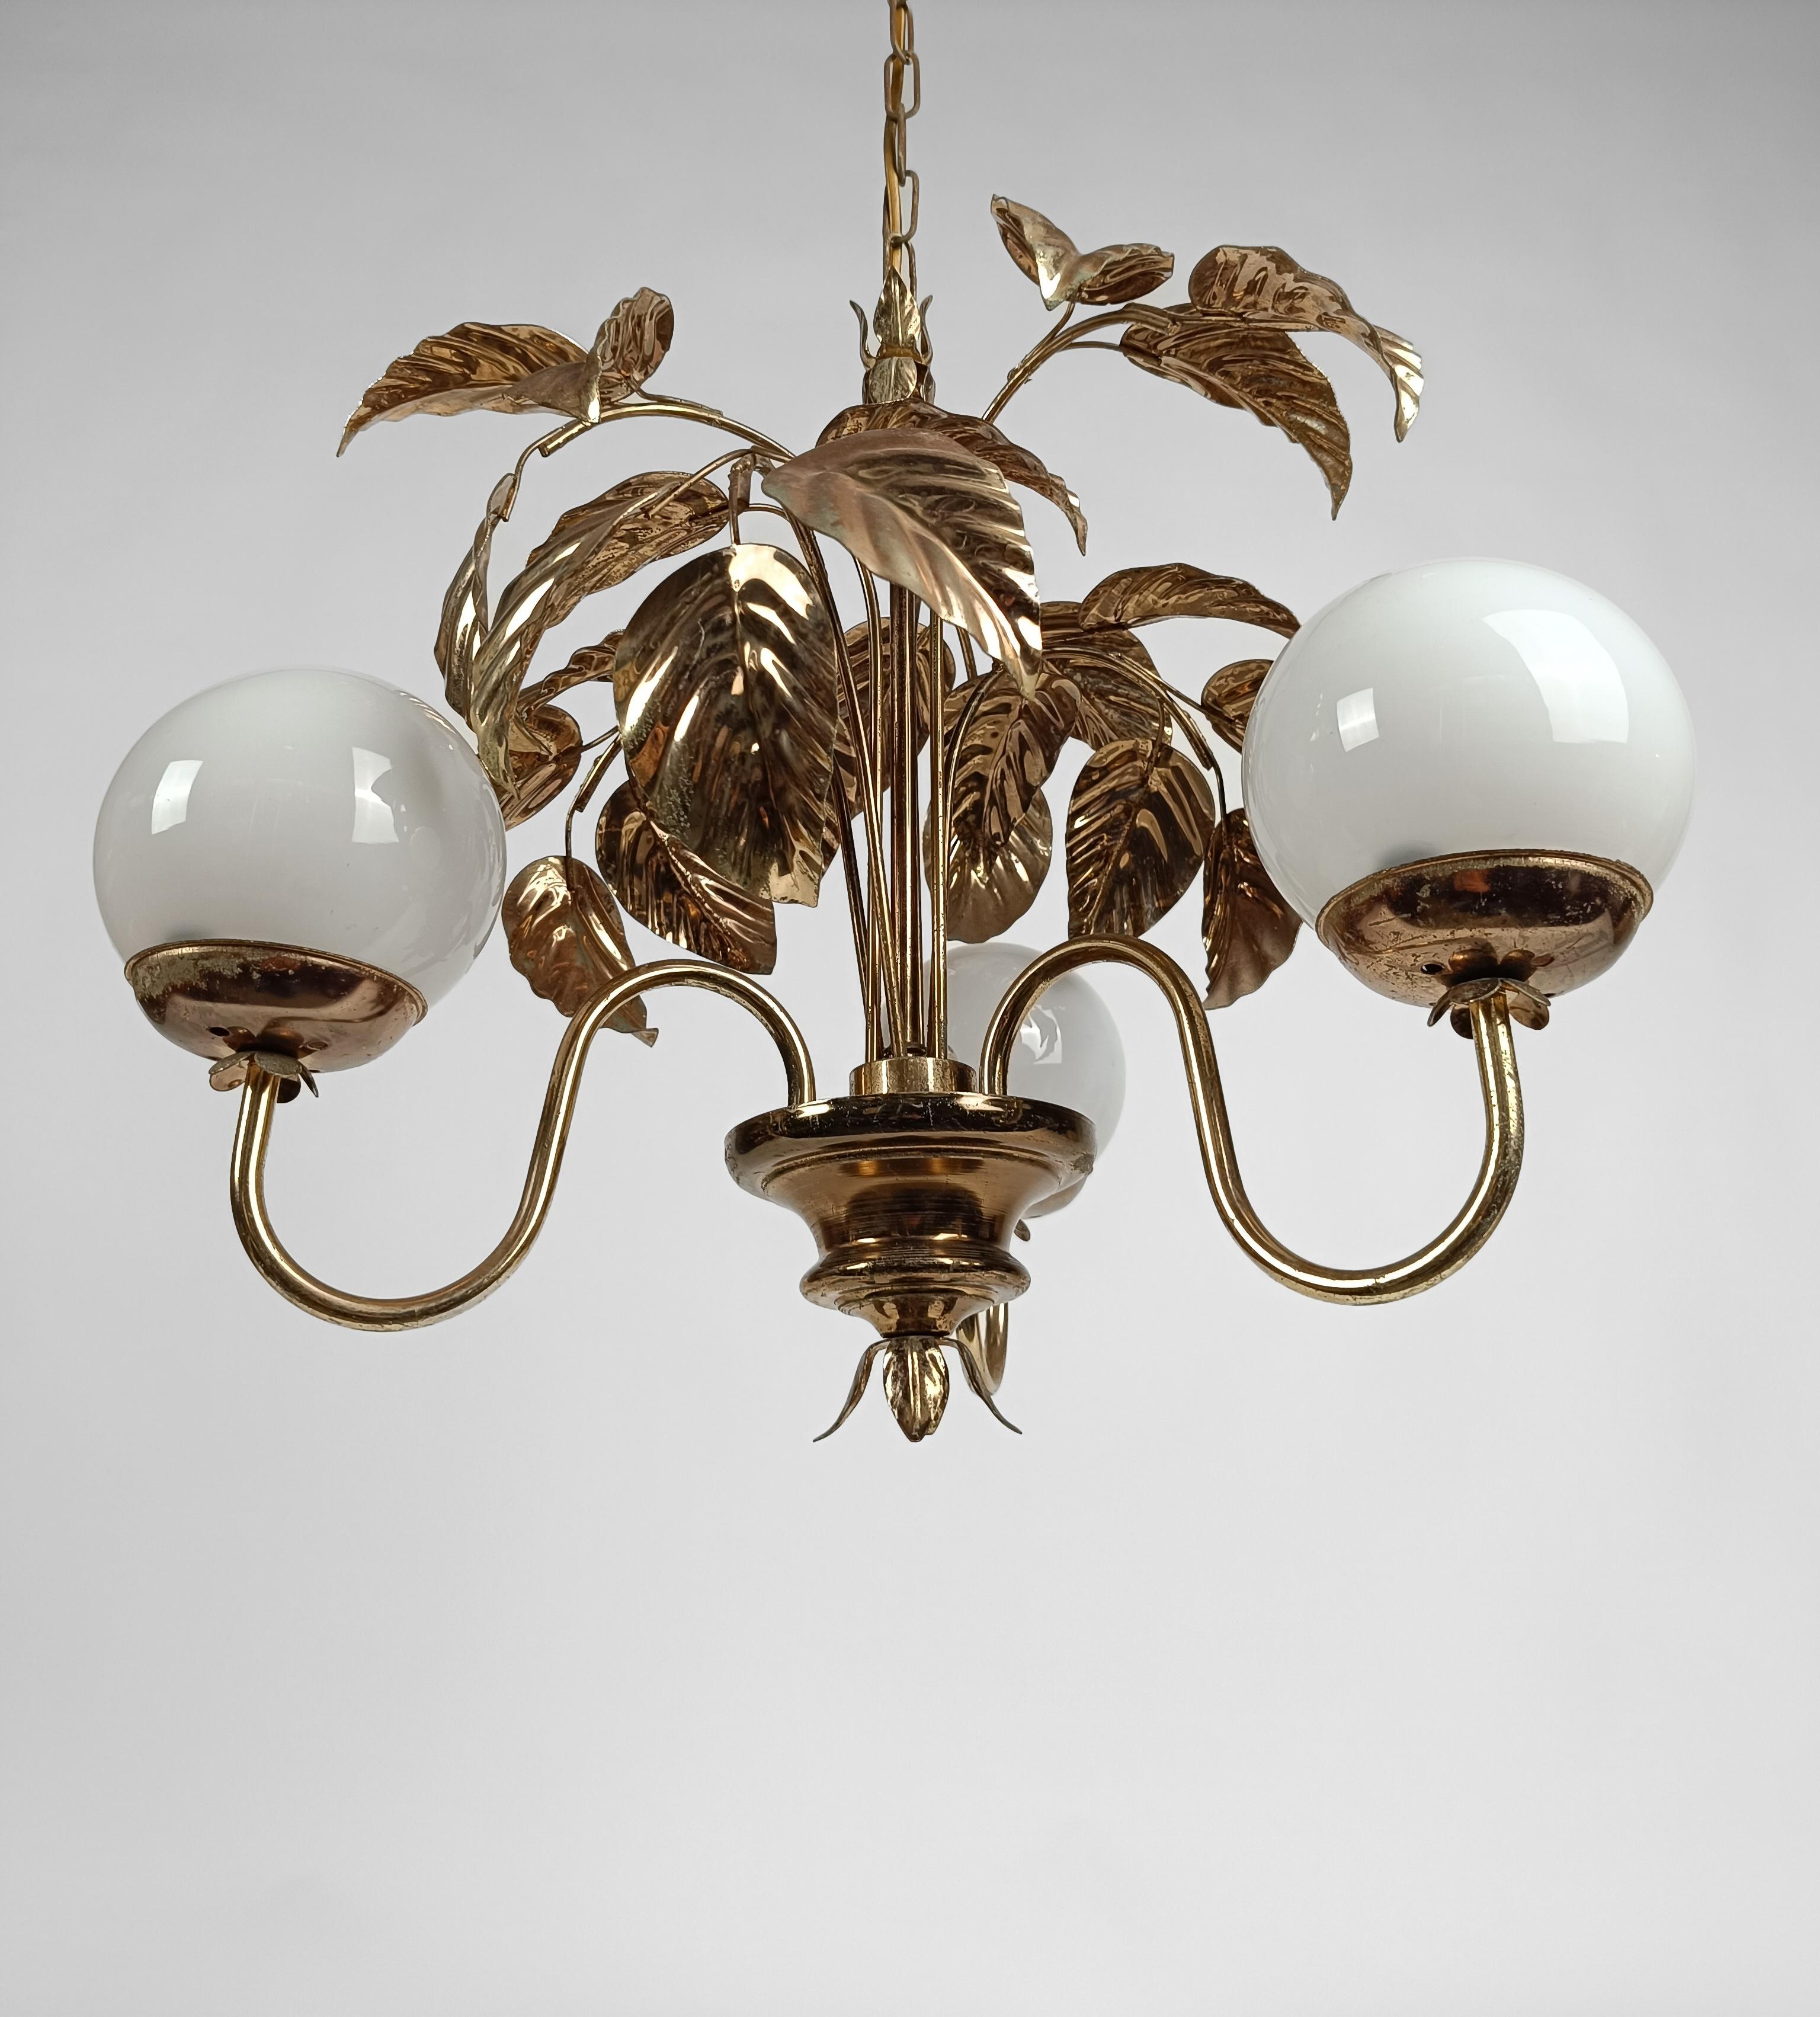 1970s Chandelier in the style of Hans Kögl with Gilded Leaves and White Opaline For Sale 4